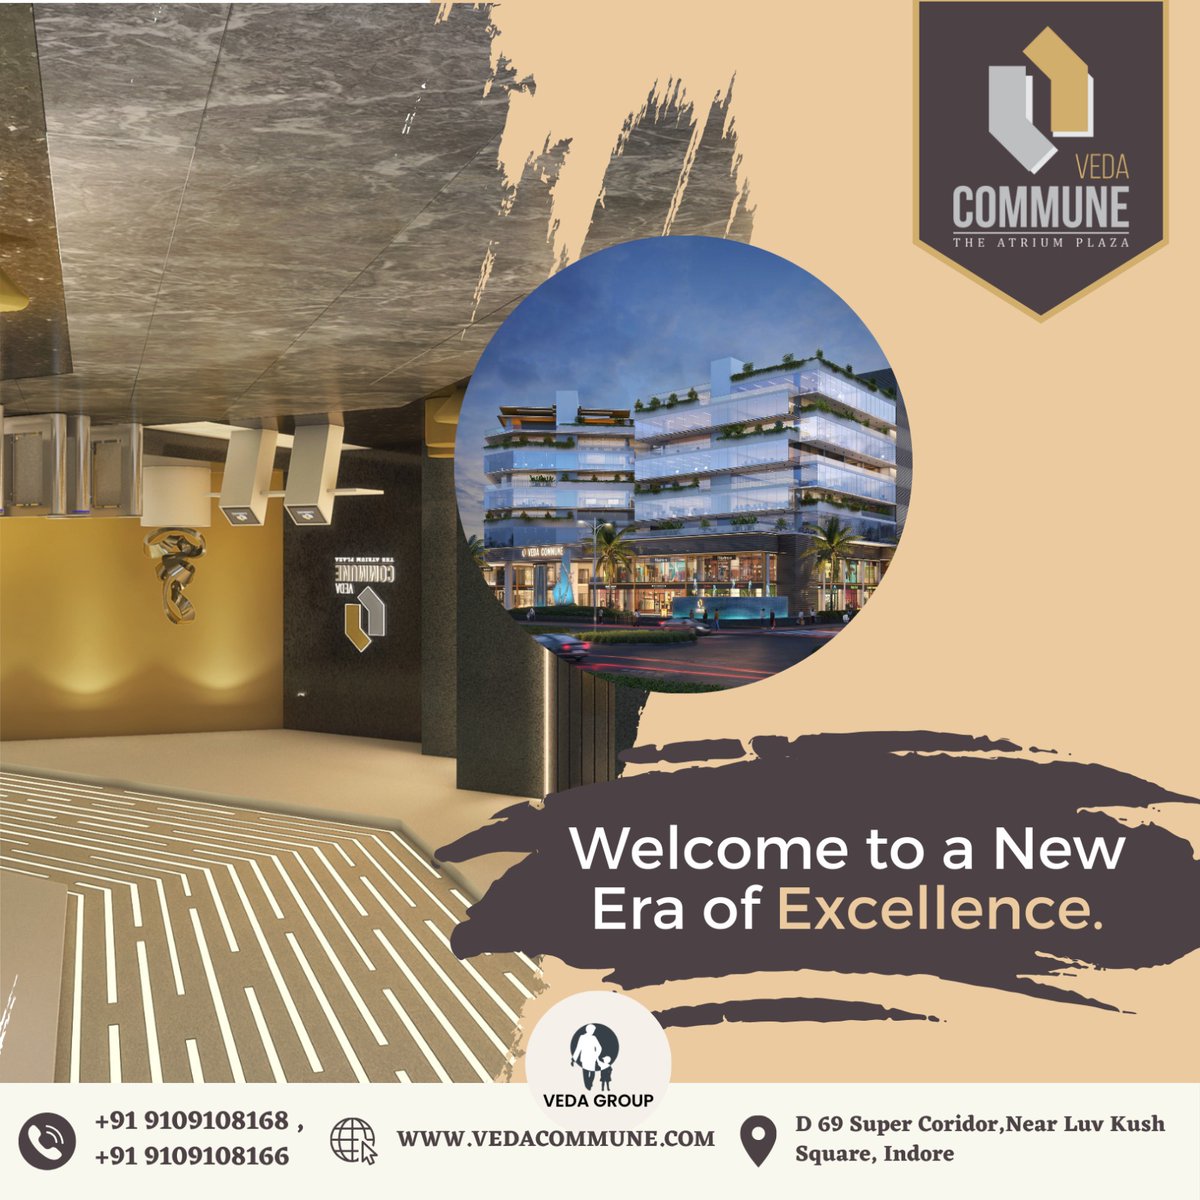 Unlock Your Business Potential at Veda Commune by Veda Group! Prime commercial spaces for sale, where success meets sophistication.
.
.
#VedaCommune #CommercialSpaces #BusinessOpportunity #Investment #RetailSpaces #PrimeLocation #GrowWithUs #NextGenBusiness #InnovationHub